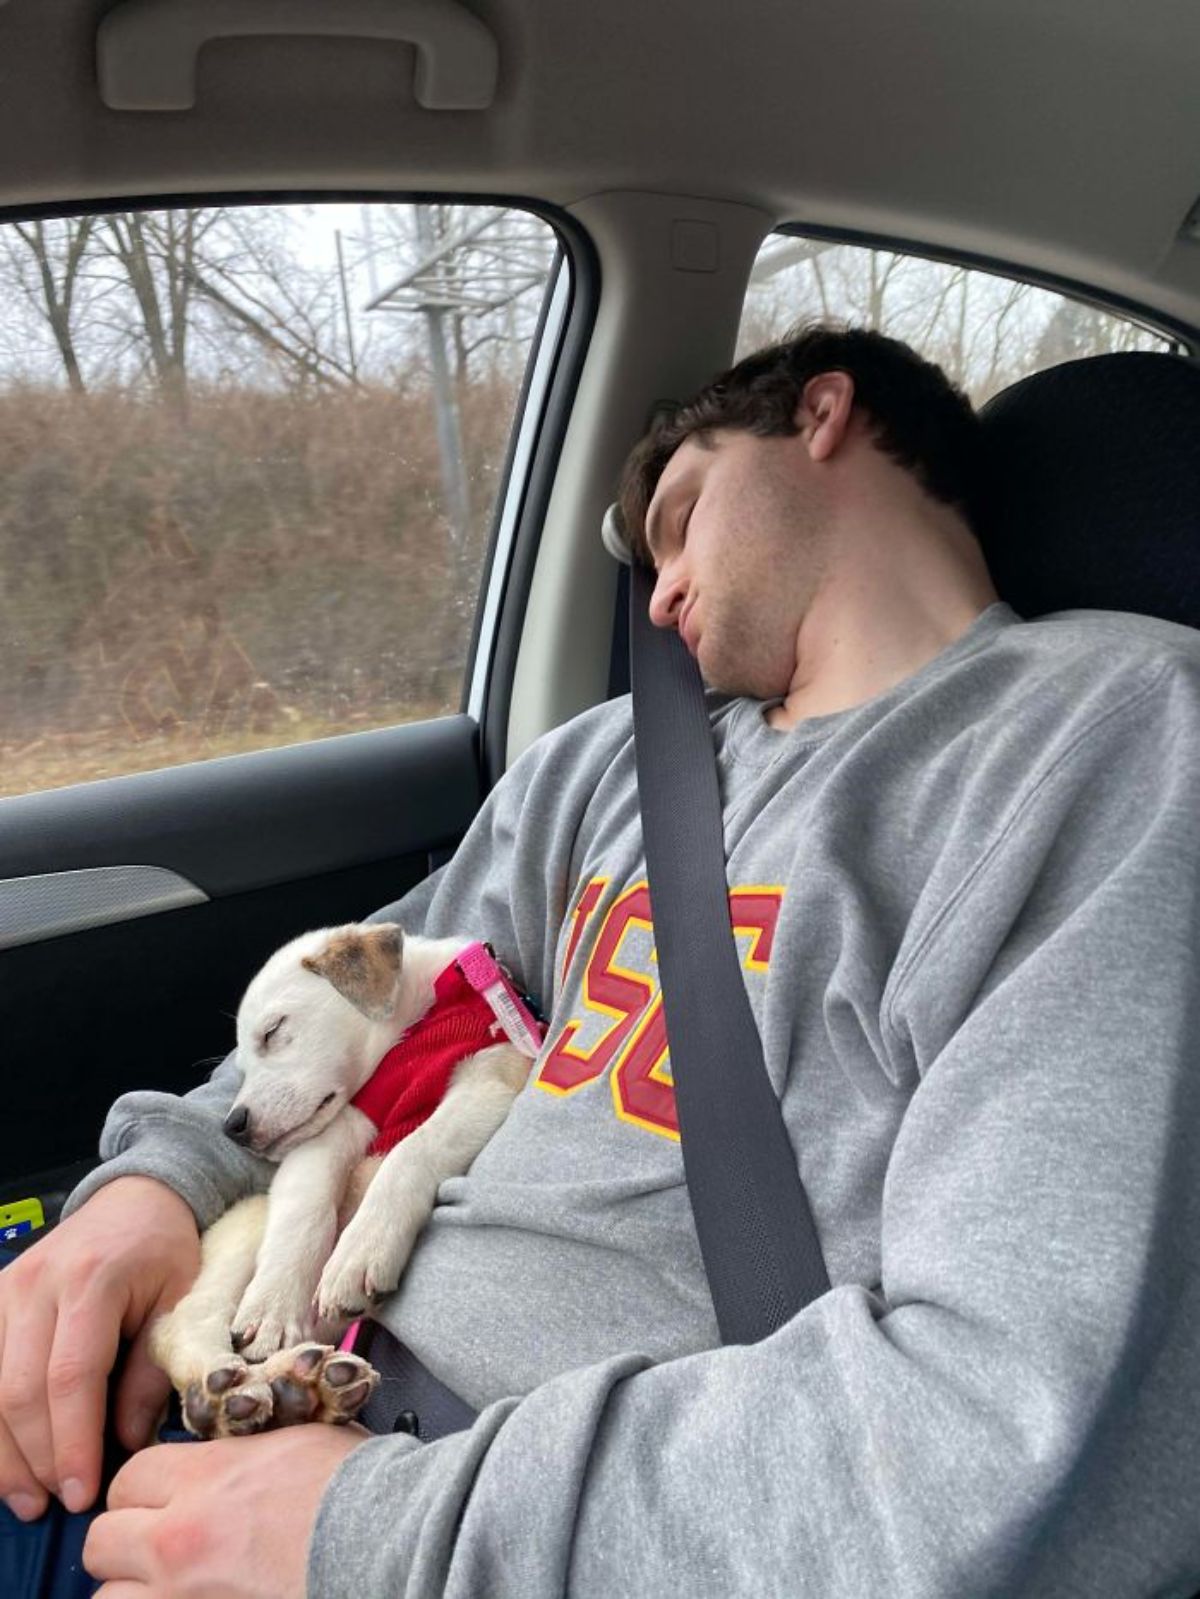 white and brown puppy wearing red sweater laying on a person and sleeping while the person is in a car with seatbelt on and sleeping